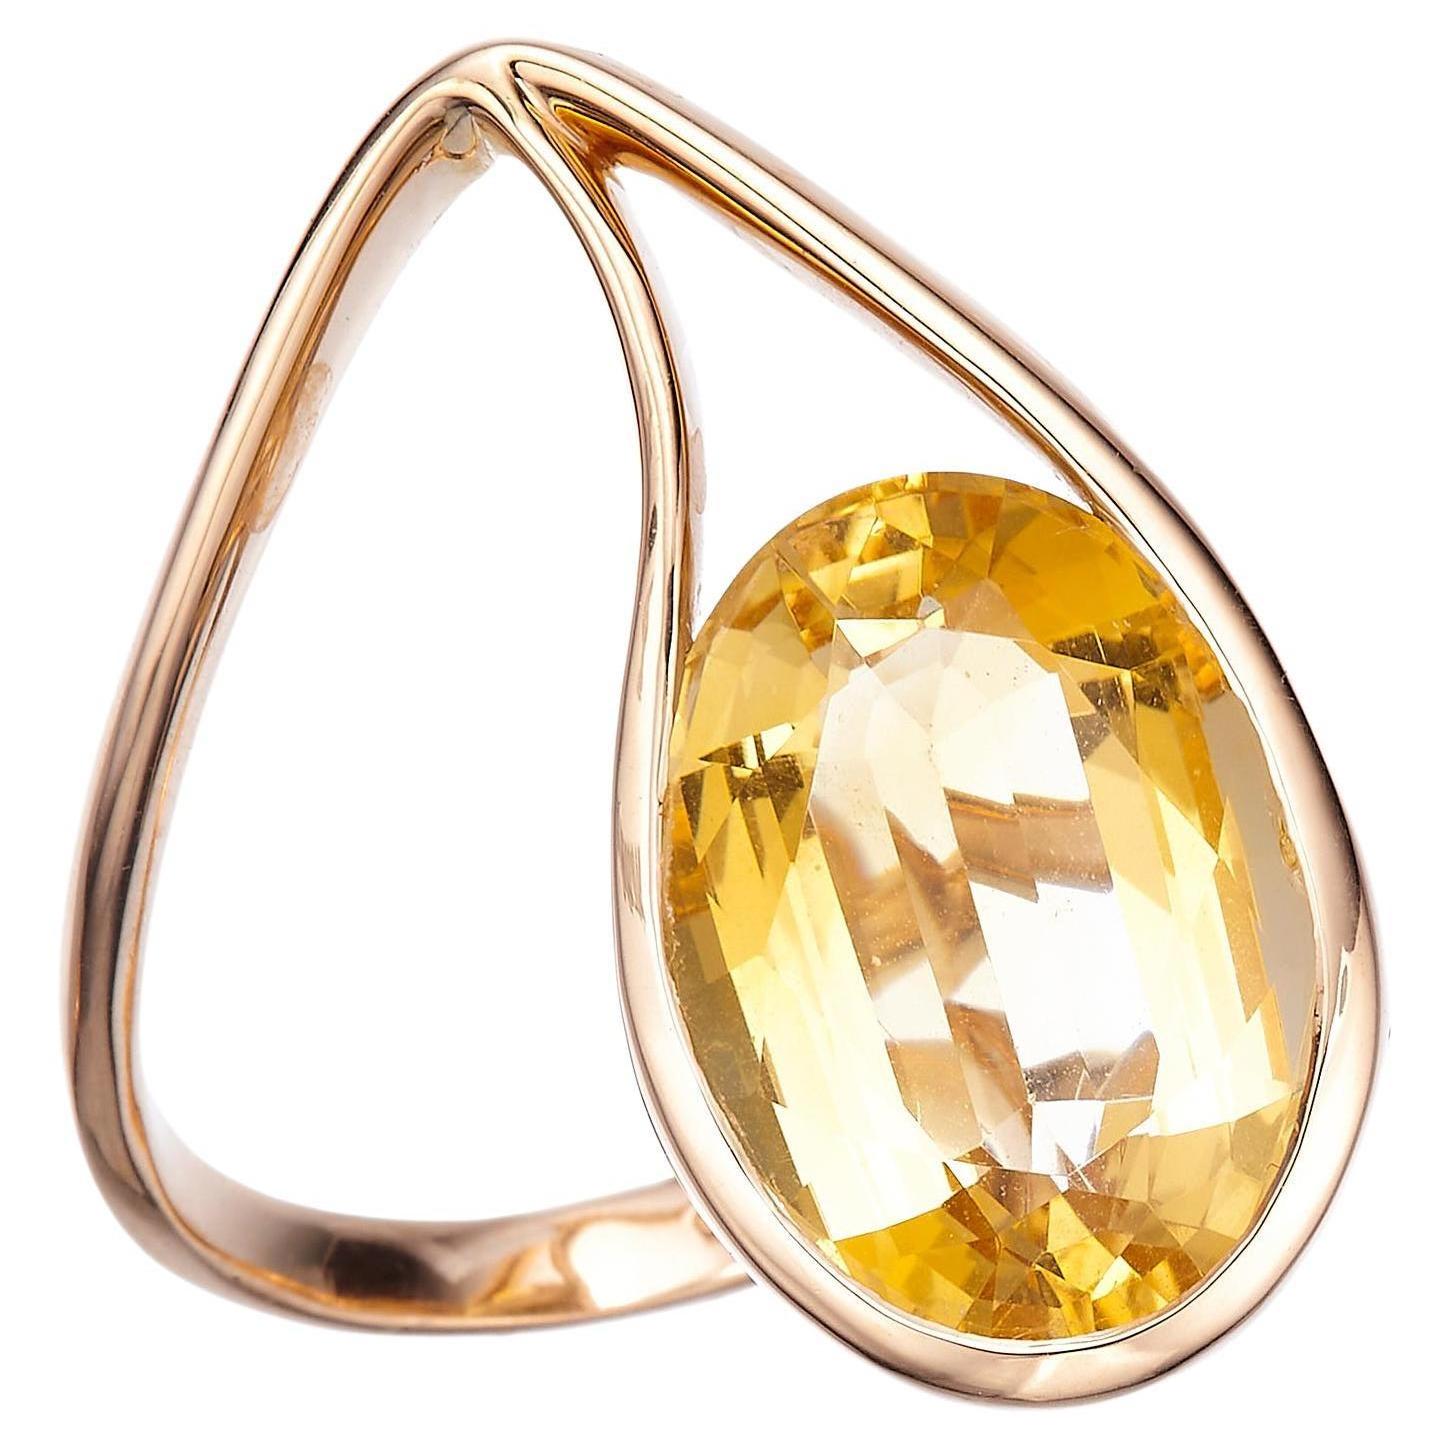 18K Rose Gold Made in Italy Design Innovatively Worn Citrine Cocktail Ring